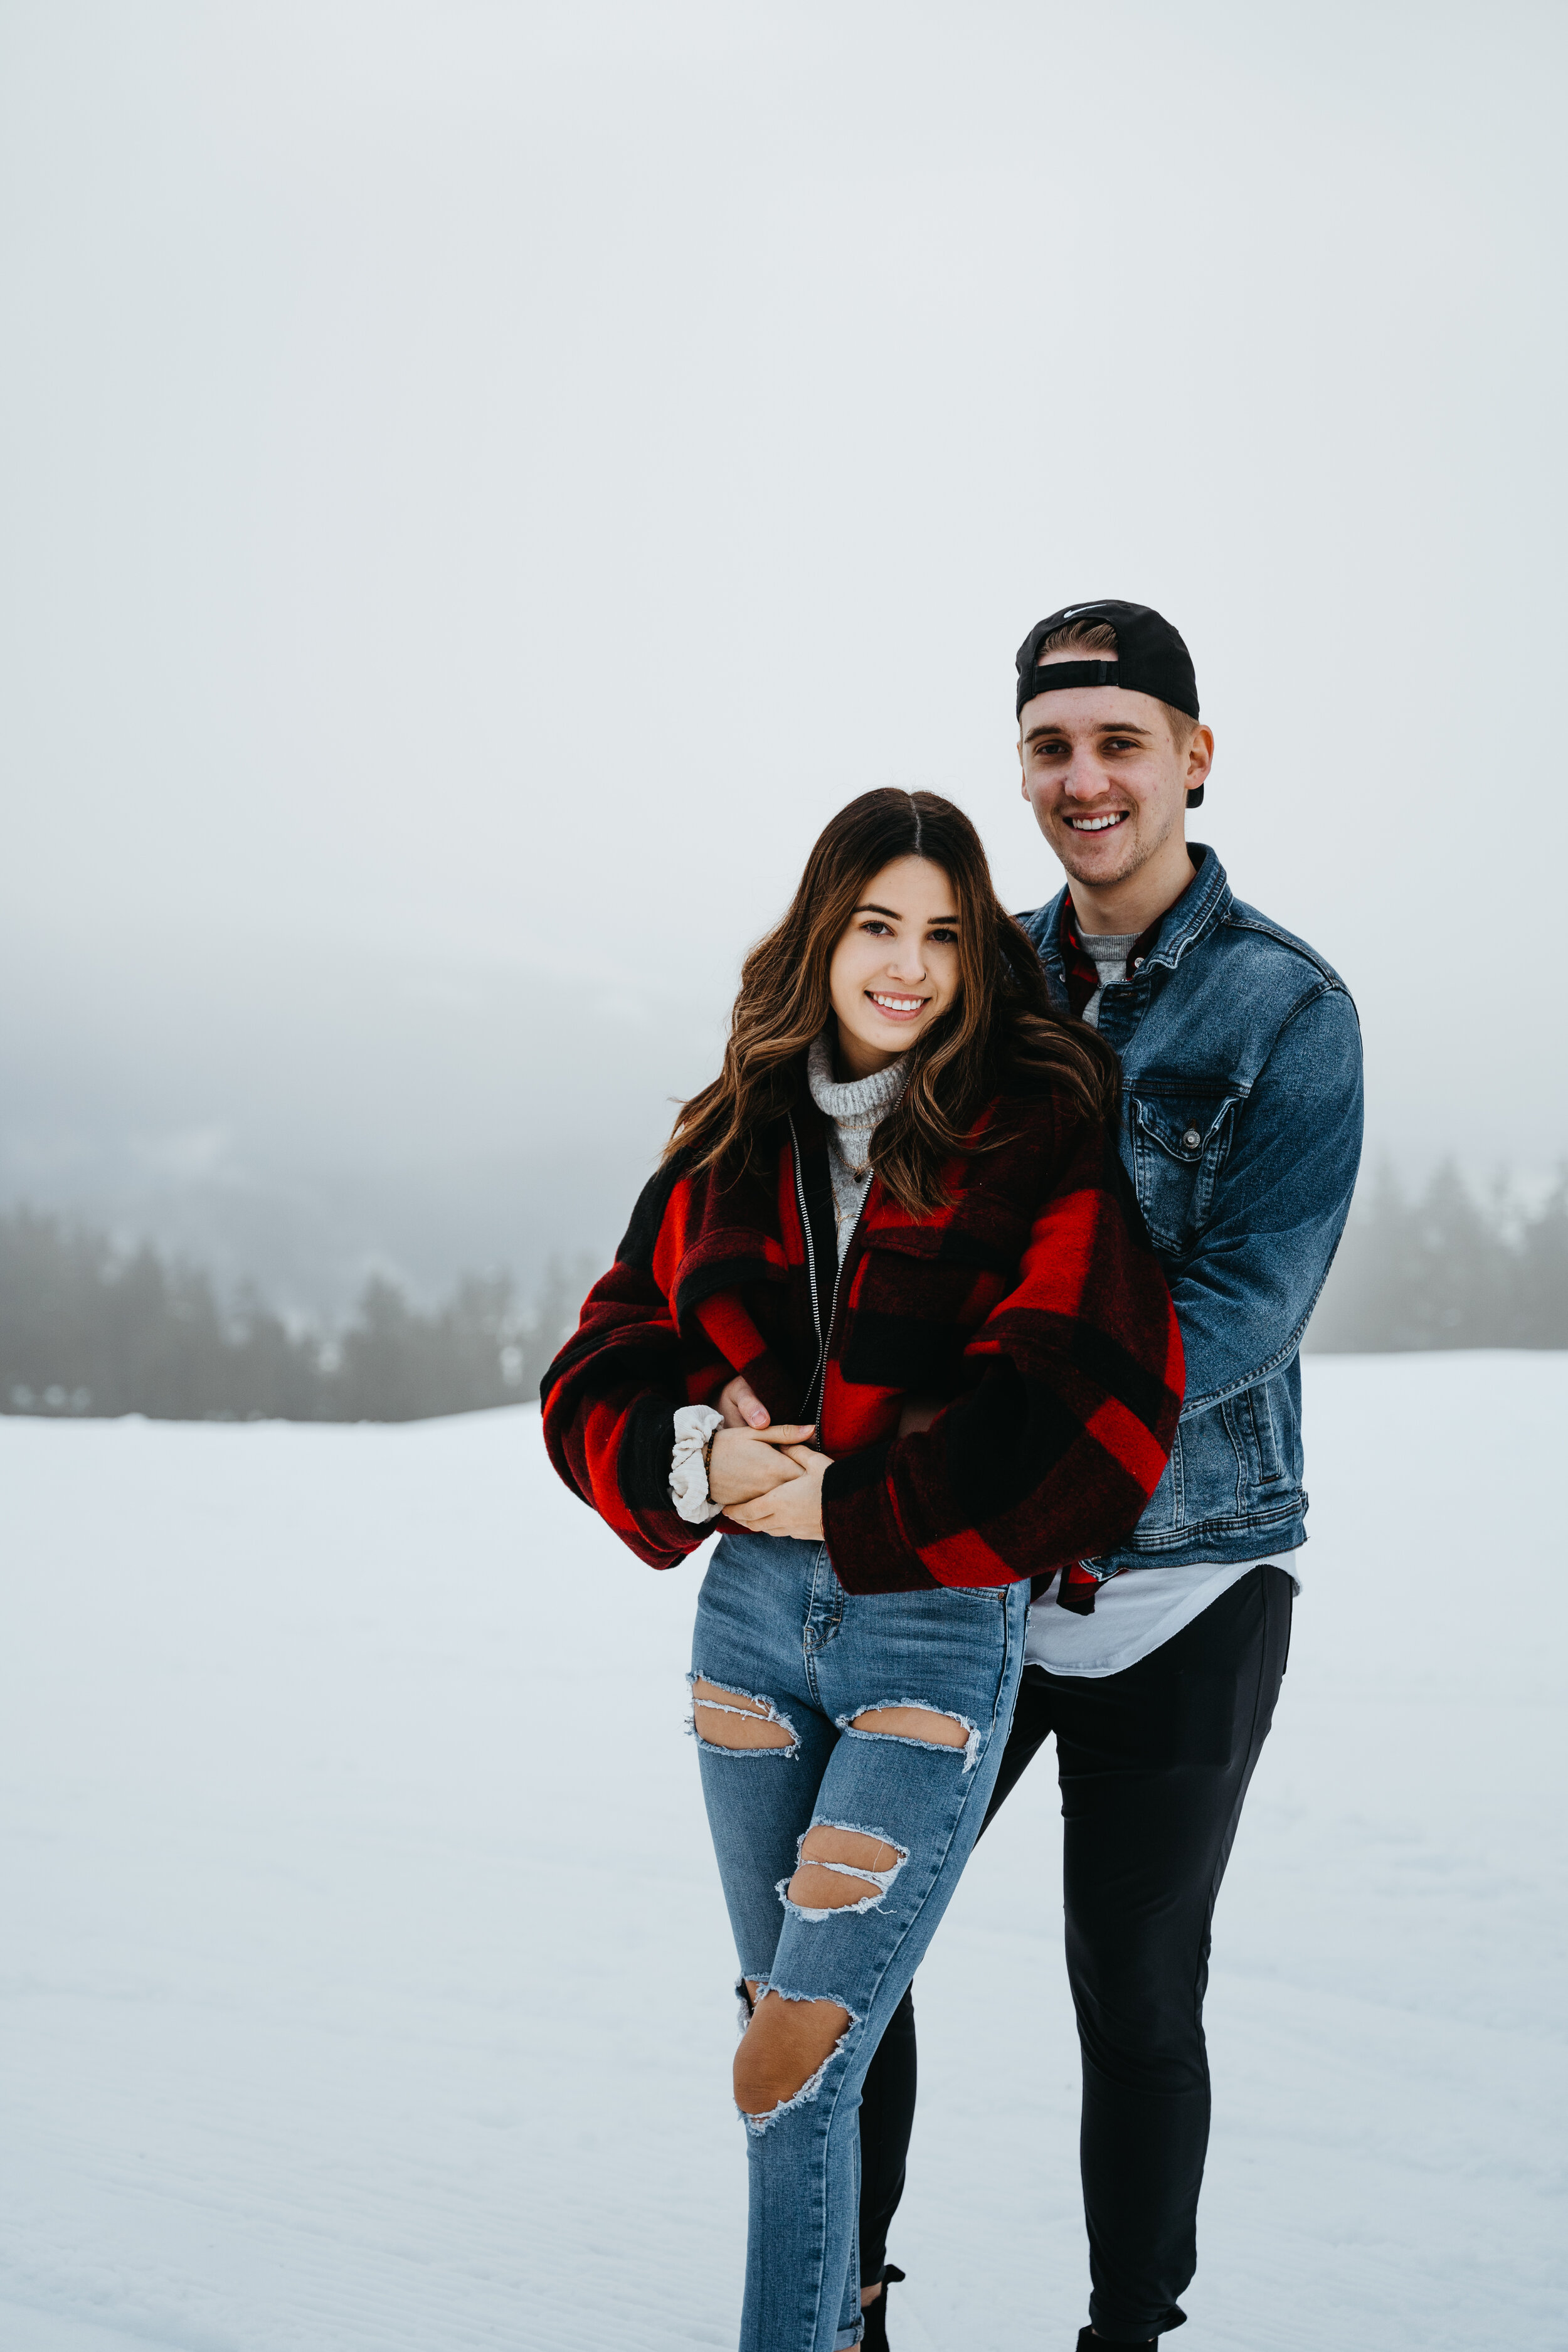 15 Ideas for Oh-So-Cozy Winter Engagement Photos - Brit + Co